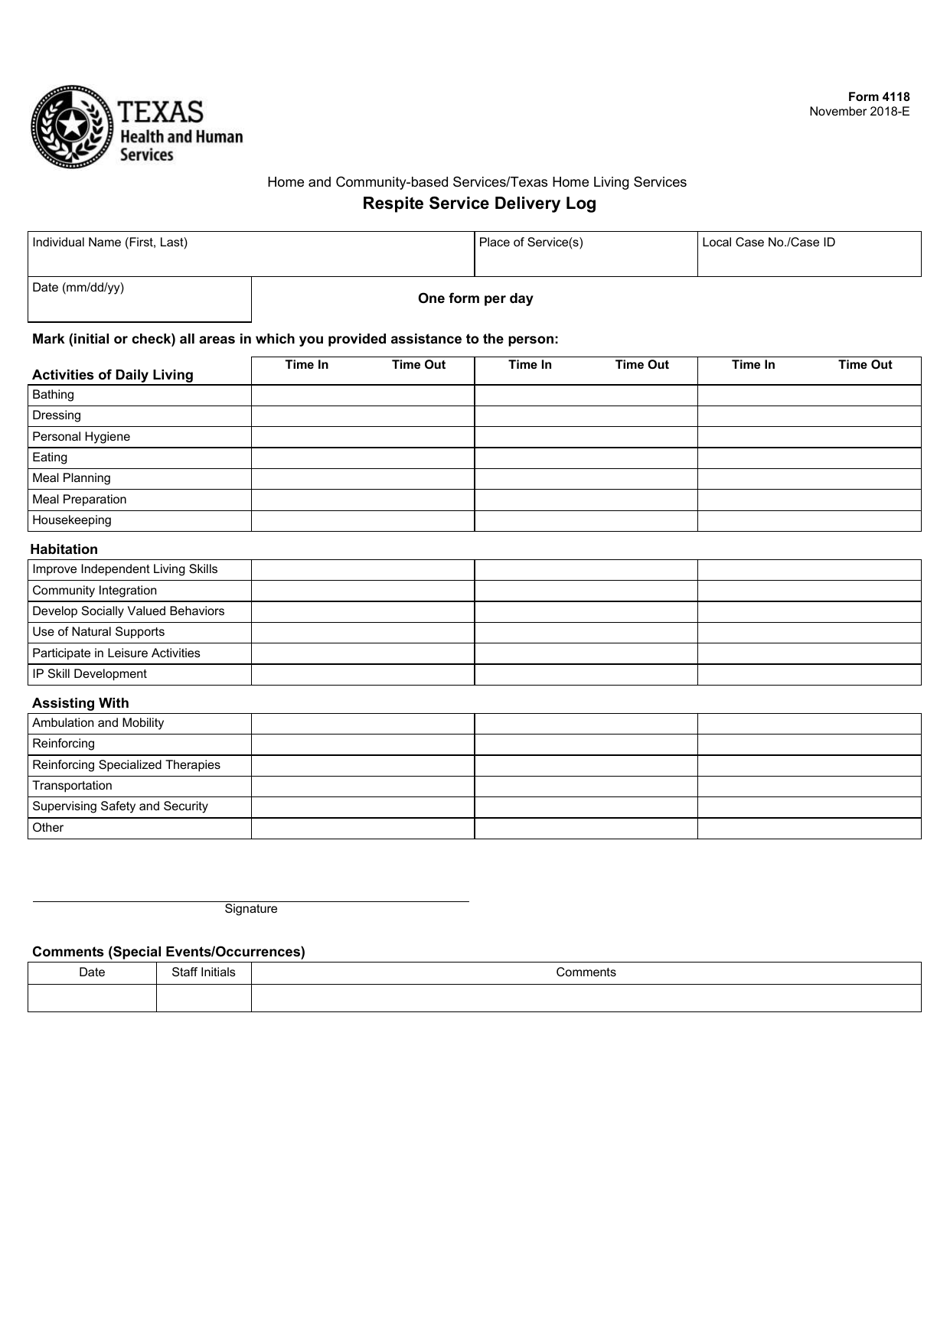 Form 4118 Respite Service Delivery Log - Texas, Page 1